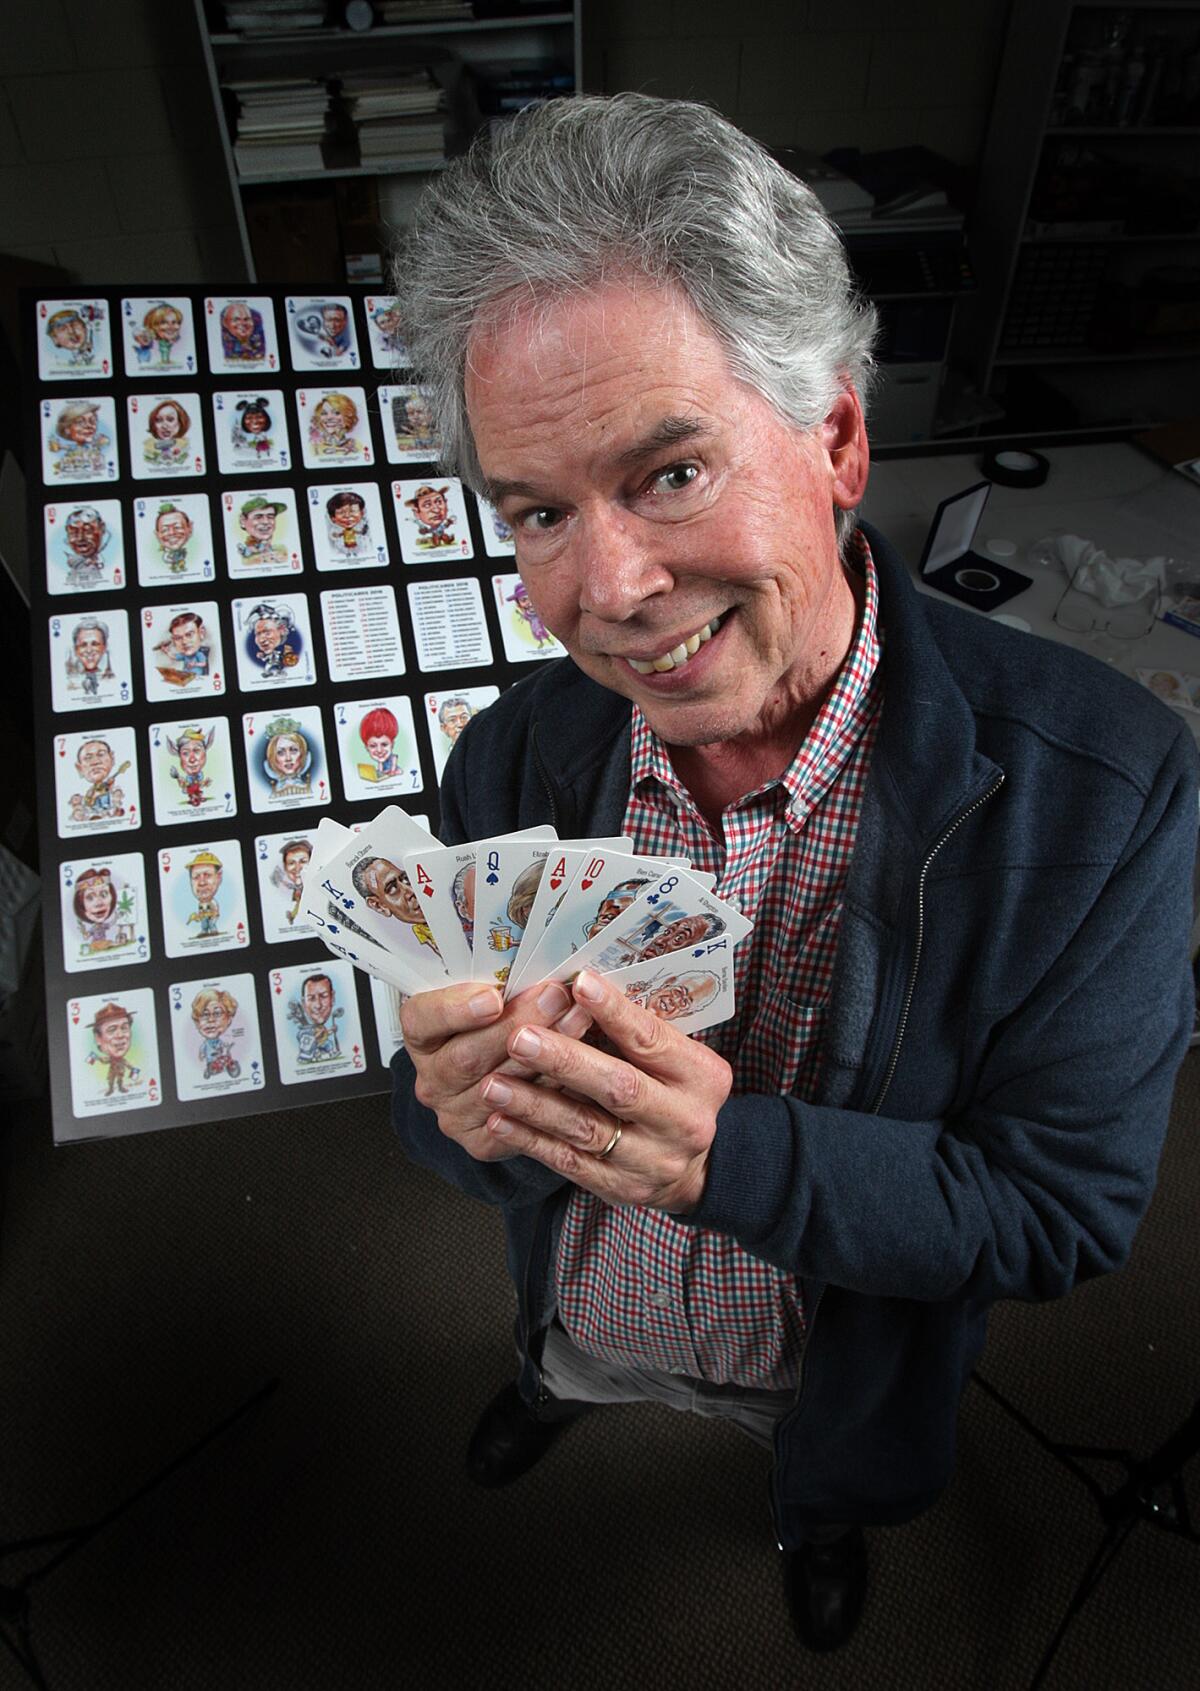 Peter Green, who has created Politicards since 1972, holds his newest edition of playing cards with childlike caricatures of current players in the election landscape in his Glendale office.